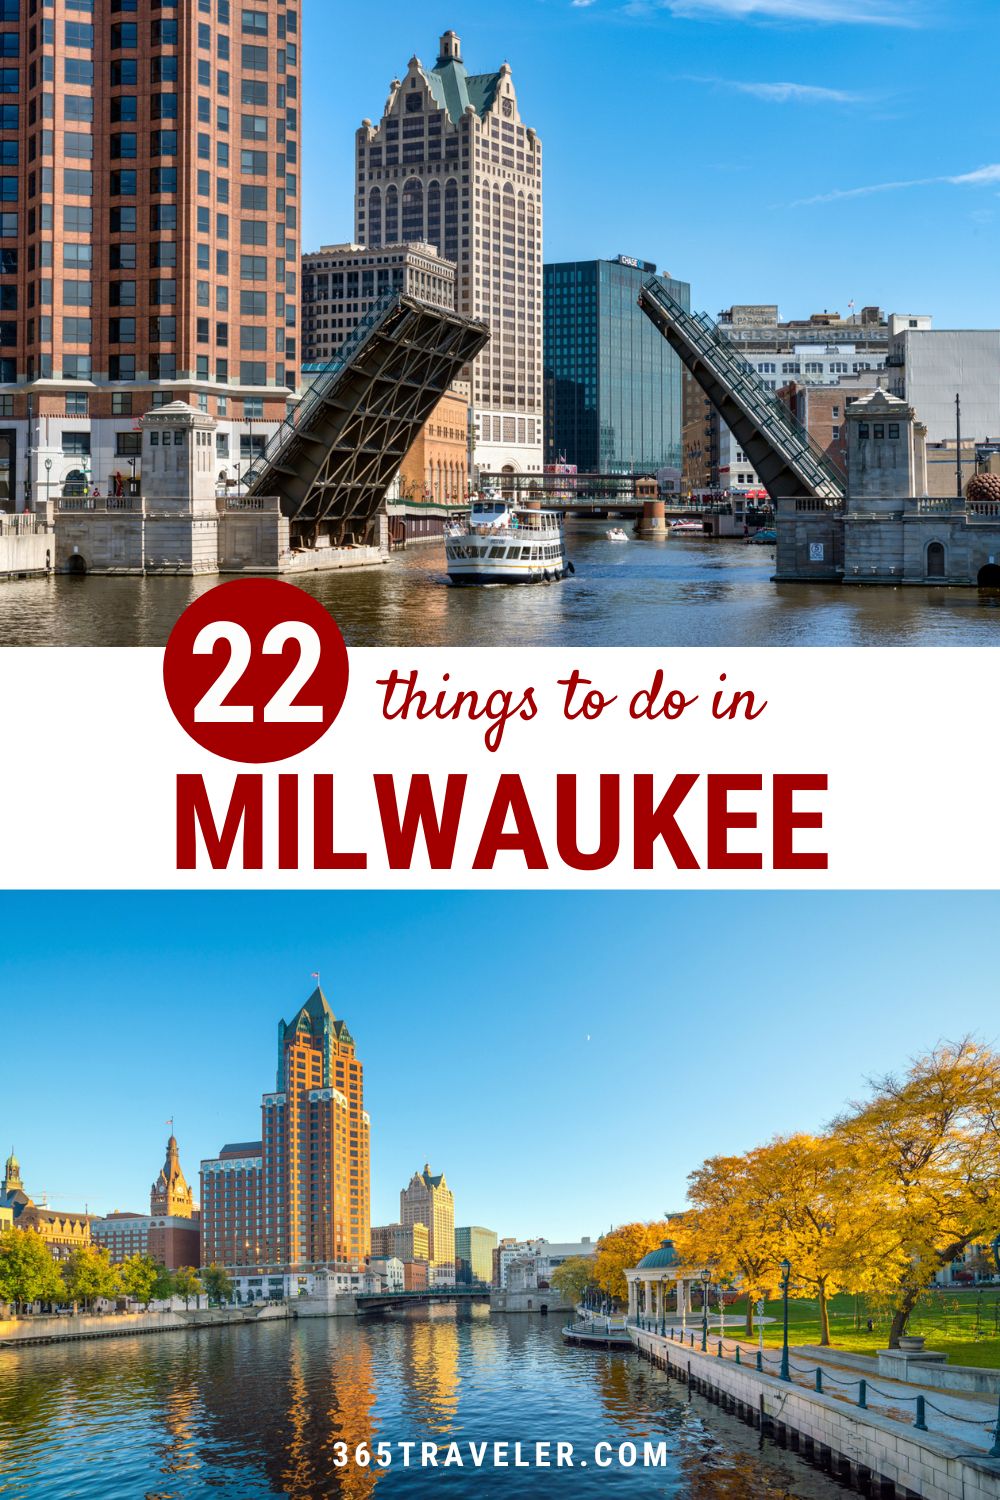 22 AMAZING THINGS TO DO IN MILWAUKEE, WISCONSIN